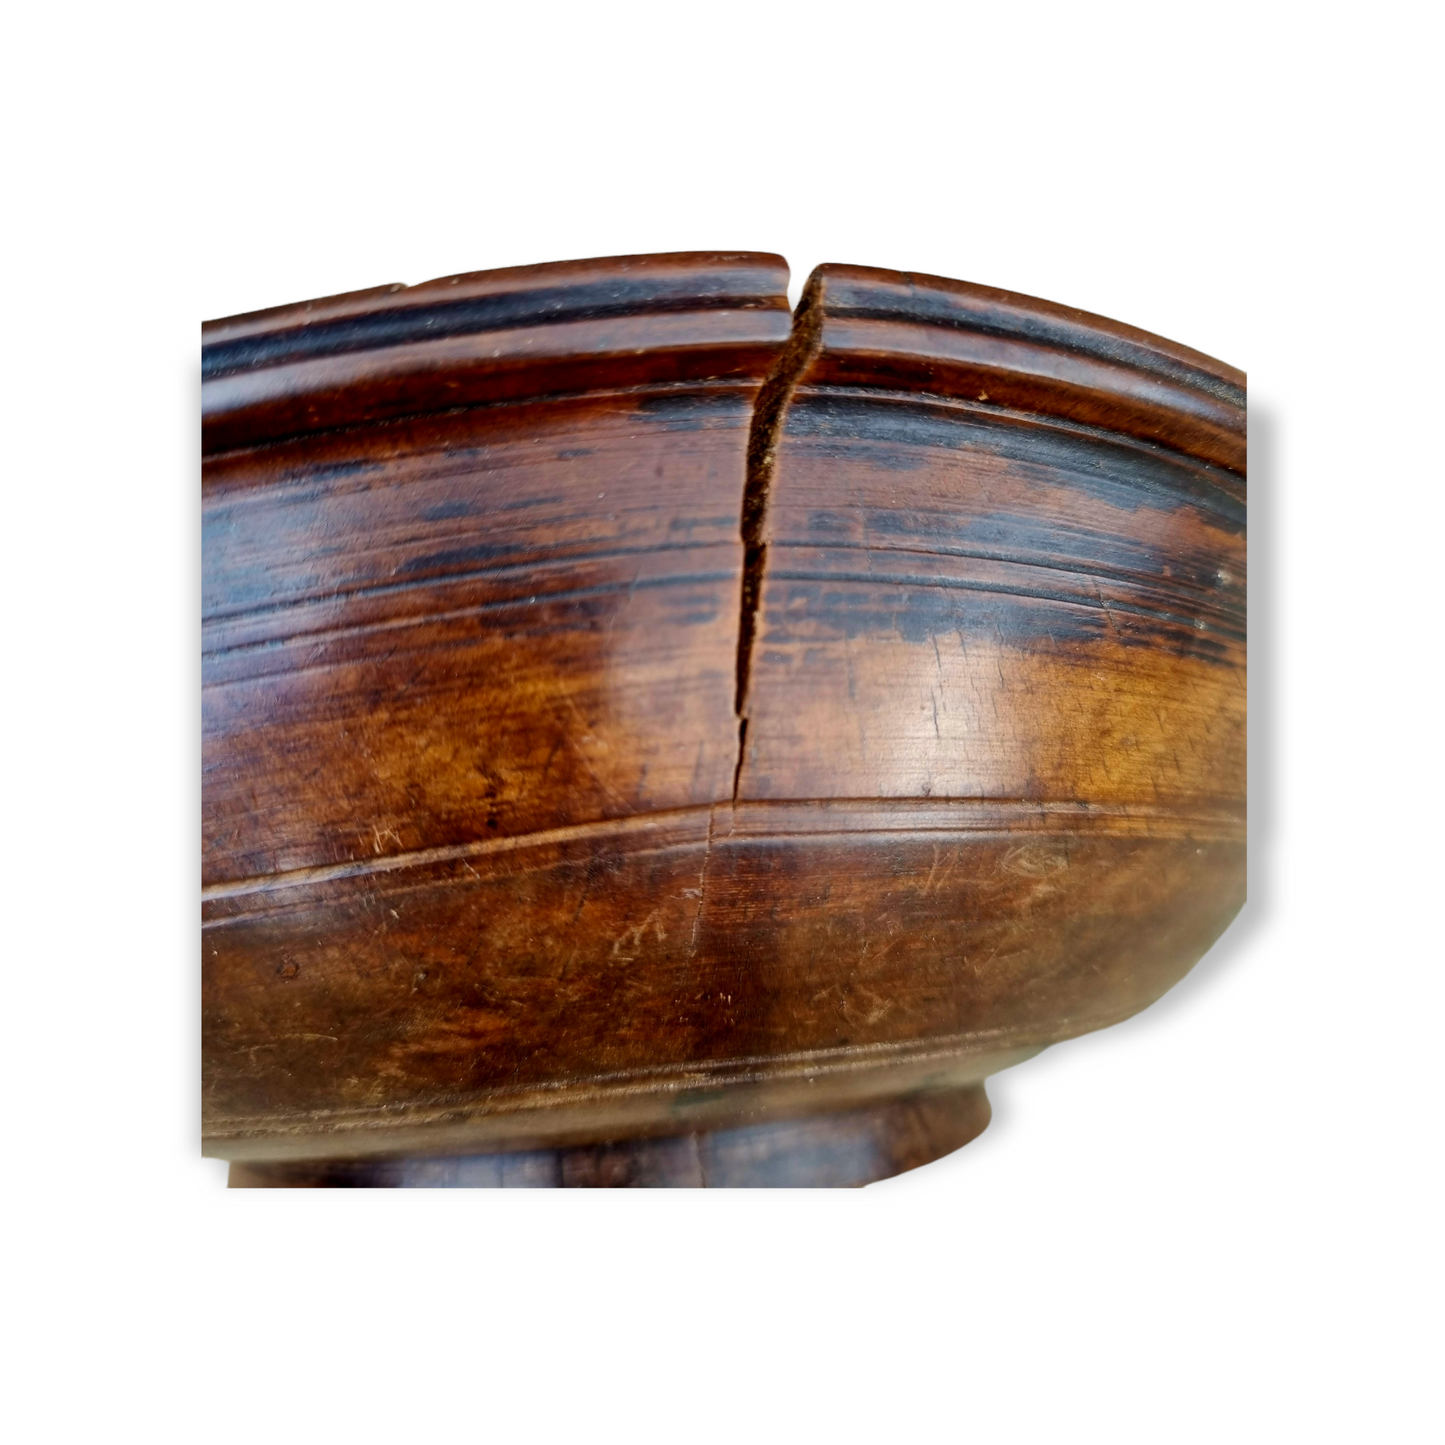 Late 18th Century English Antique Fruitwood Bowl